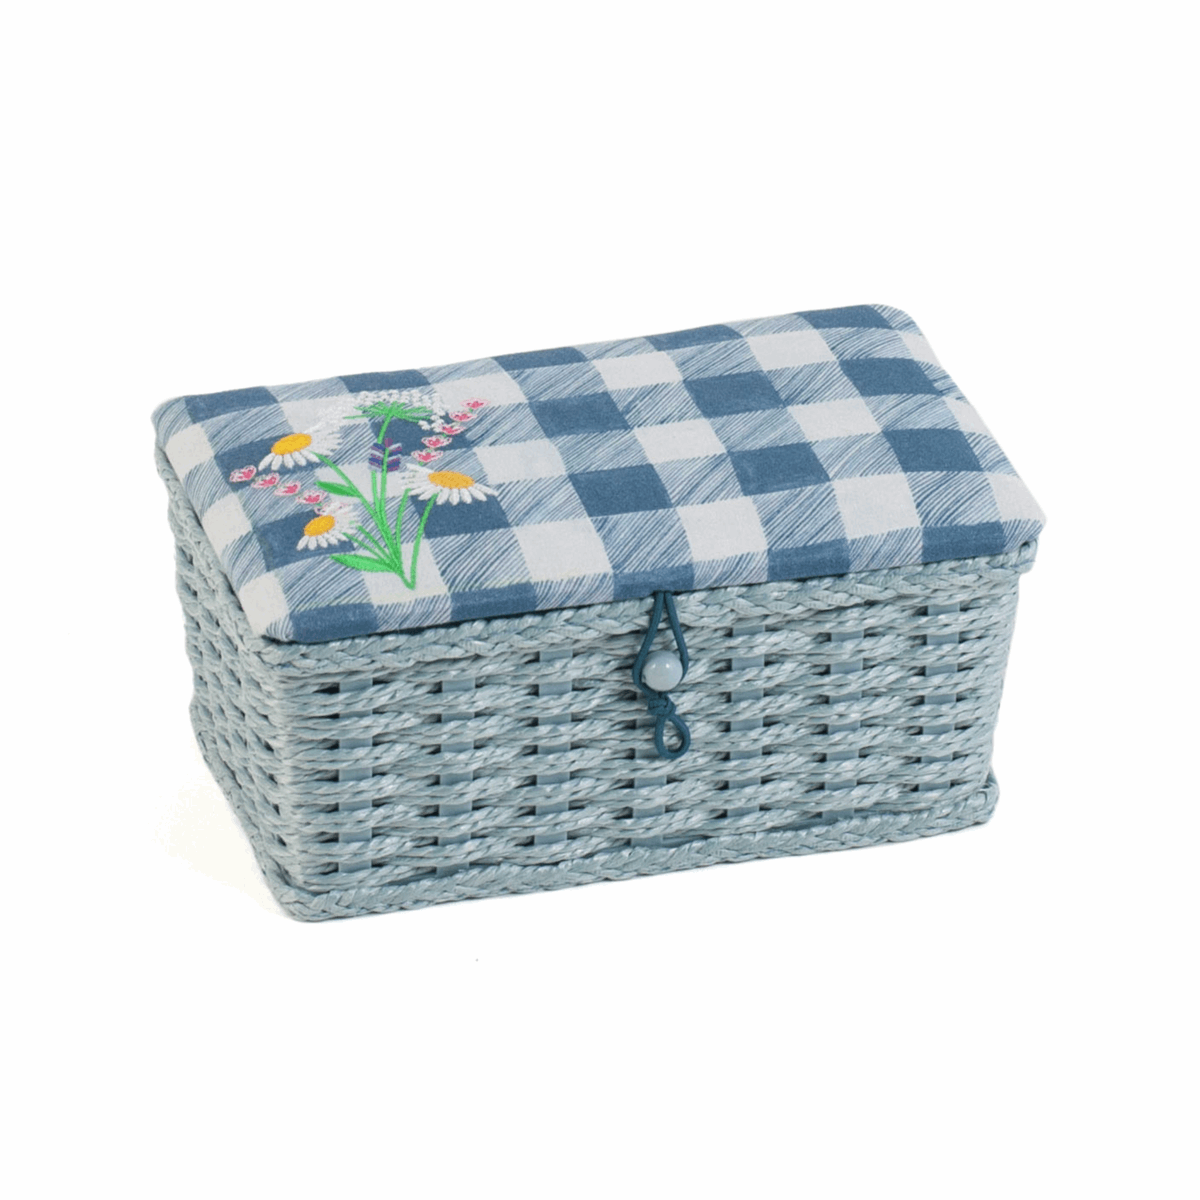 Wild Floral Plaid Rectangle Woven Basket Sewing Box - Small